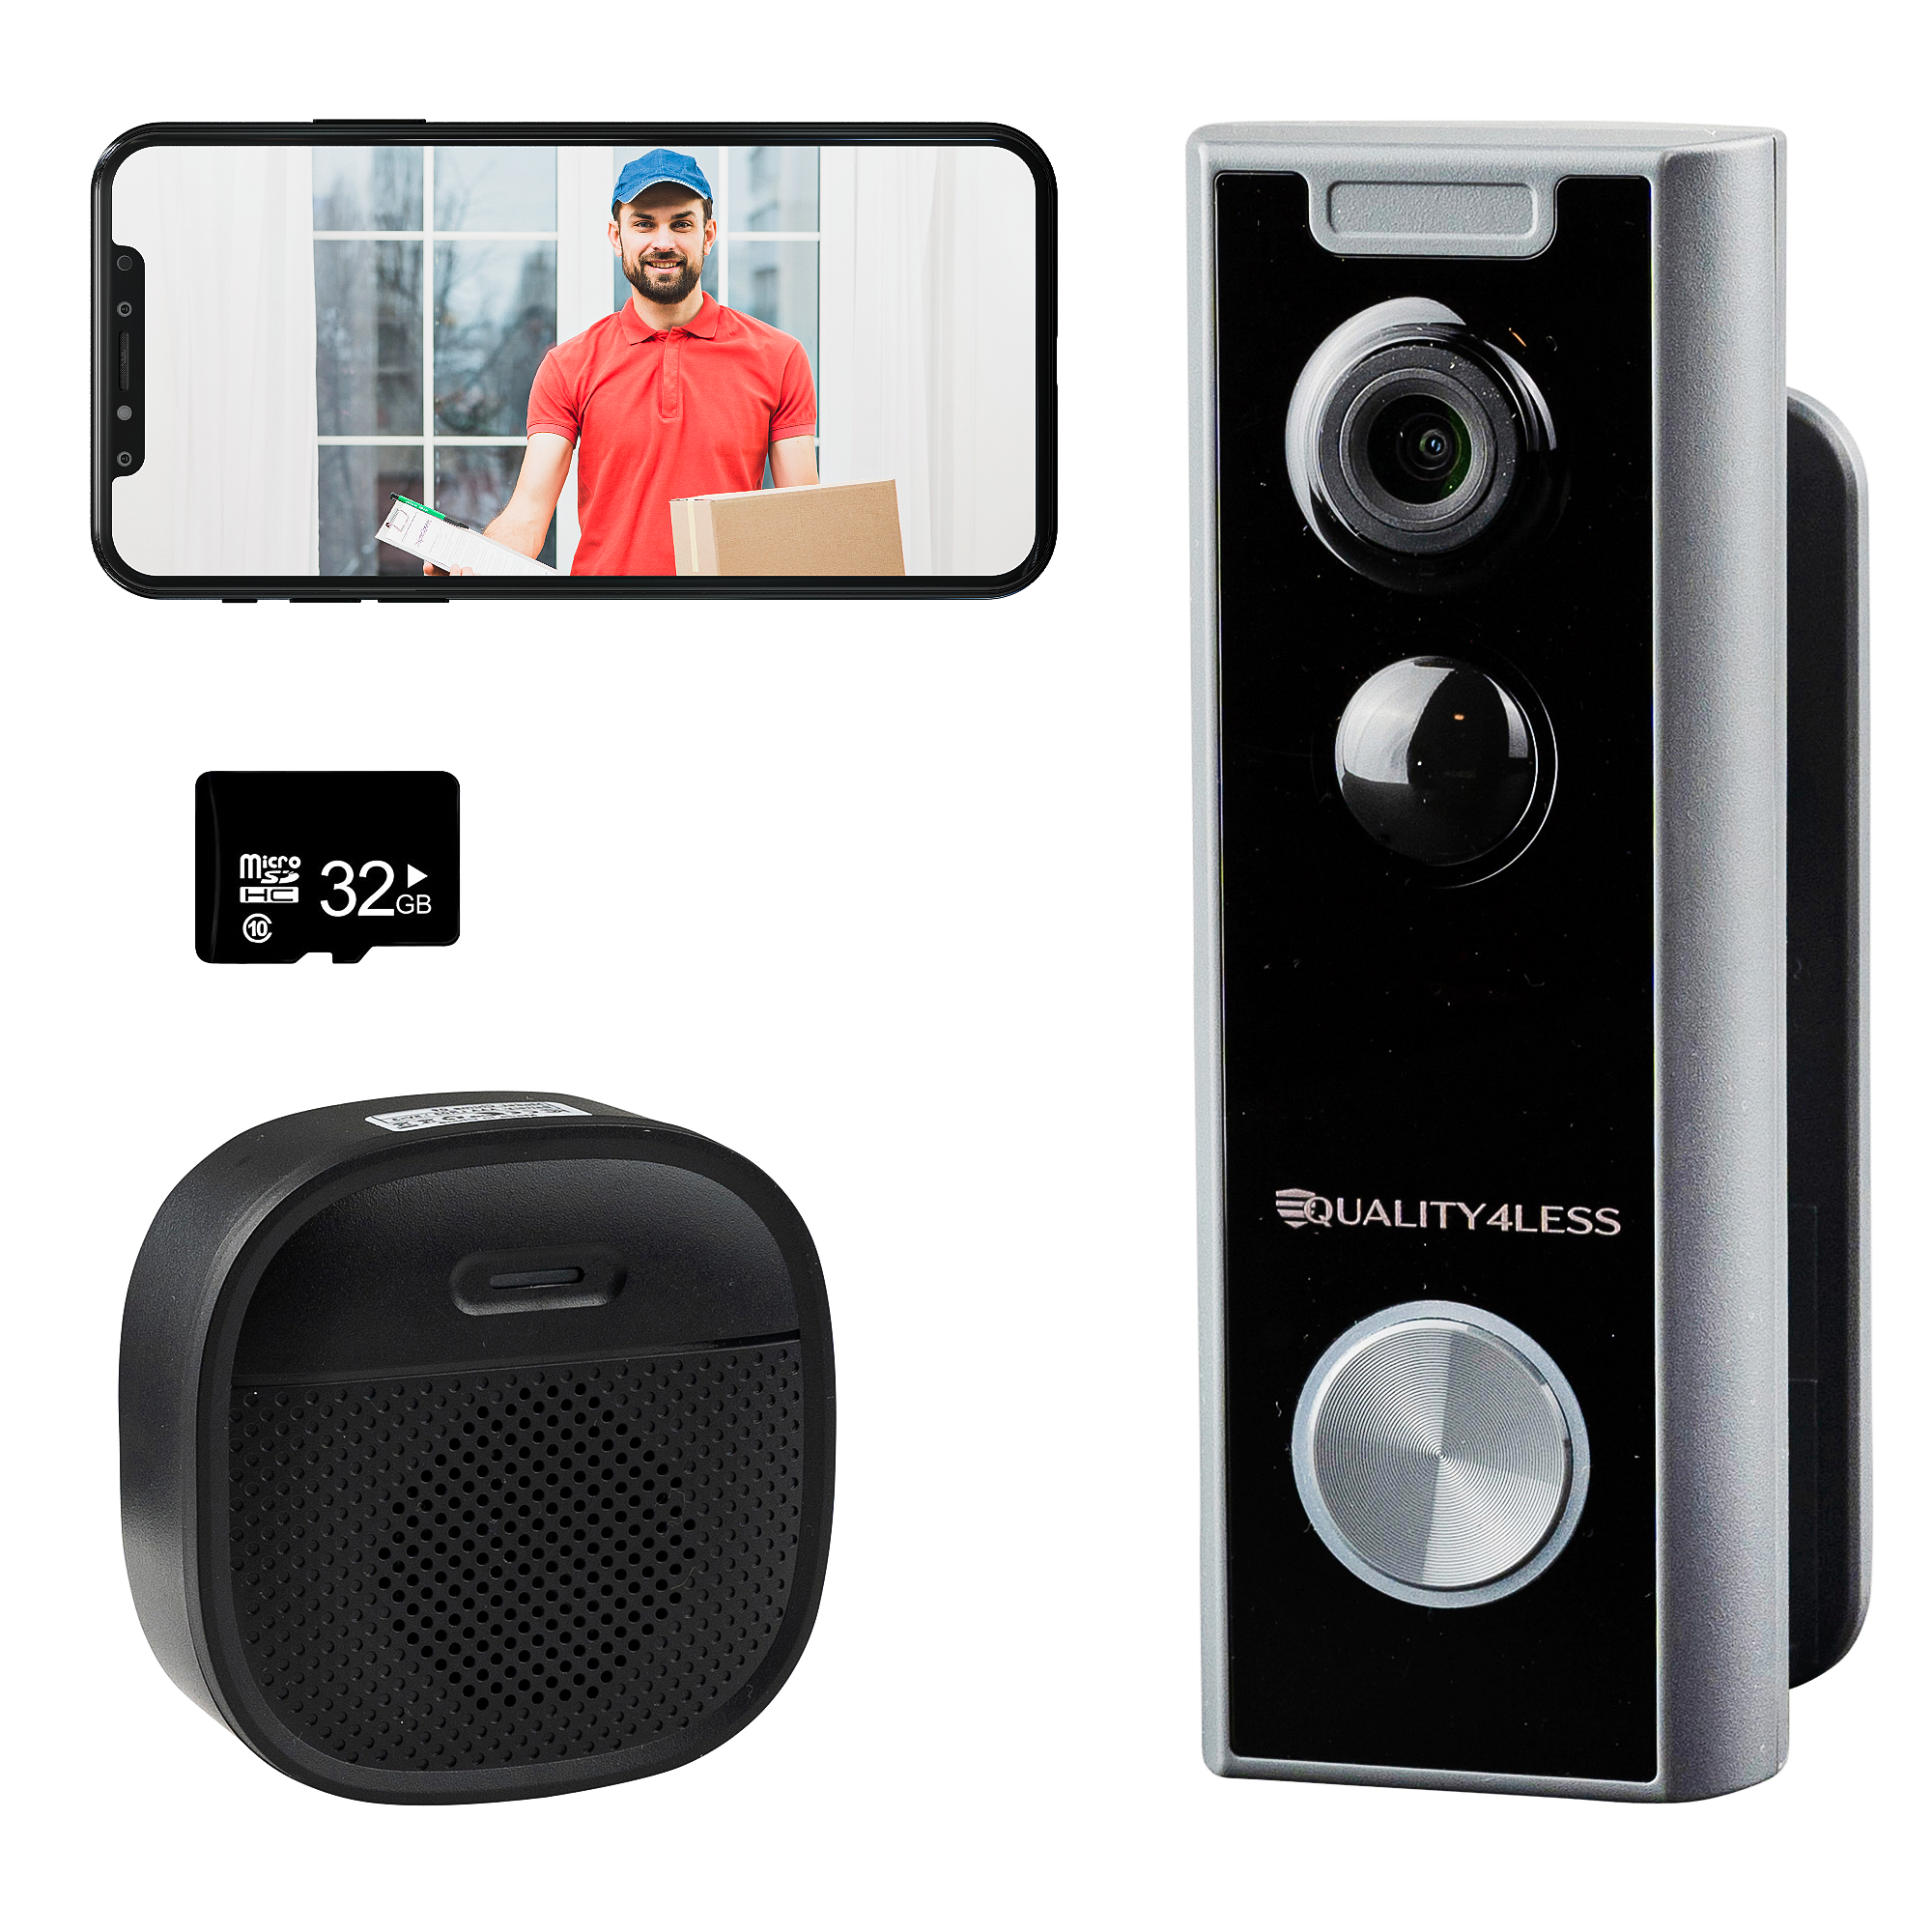 Quality4Less™ - Wireless Video Doorbell - Incl. Gong and SD Card - Full HD - Wifi Doorbell